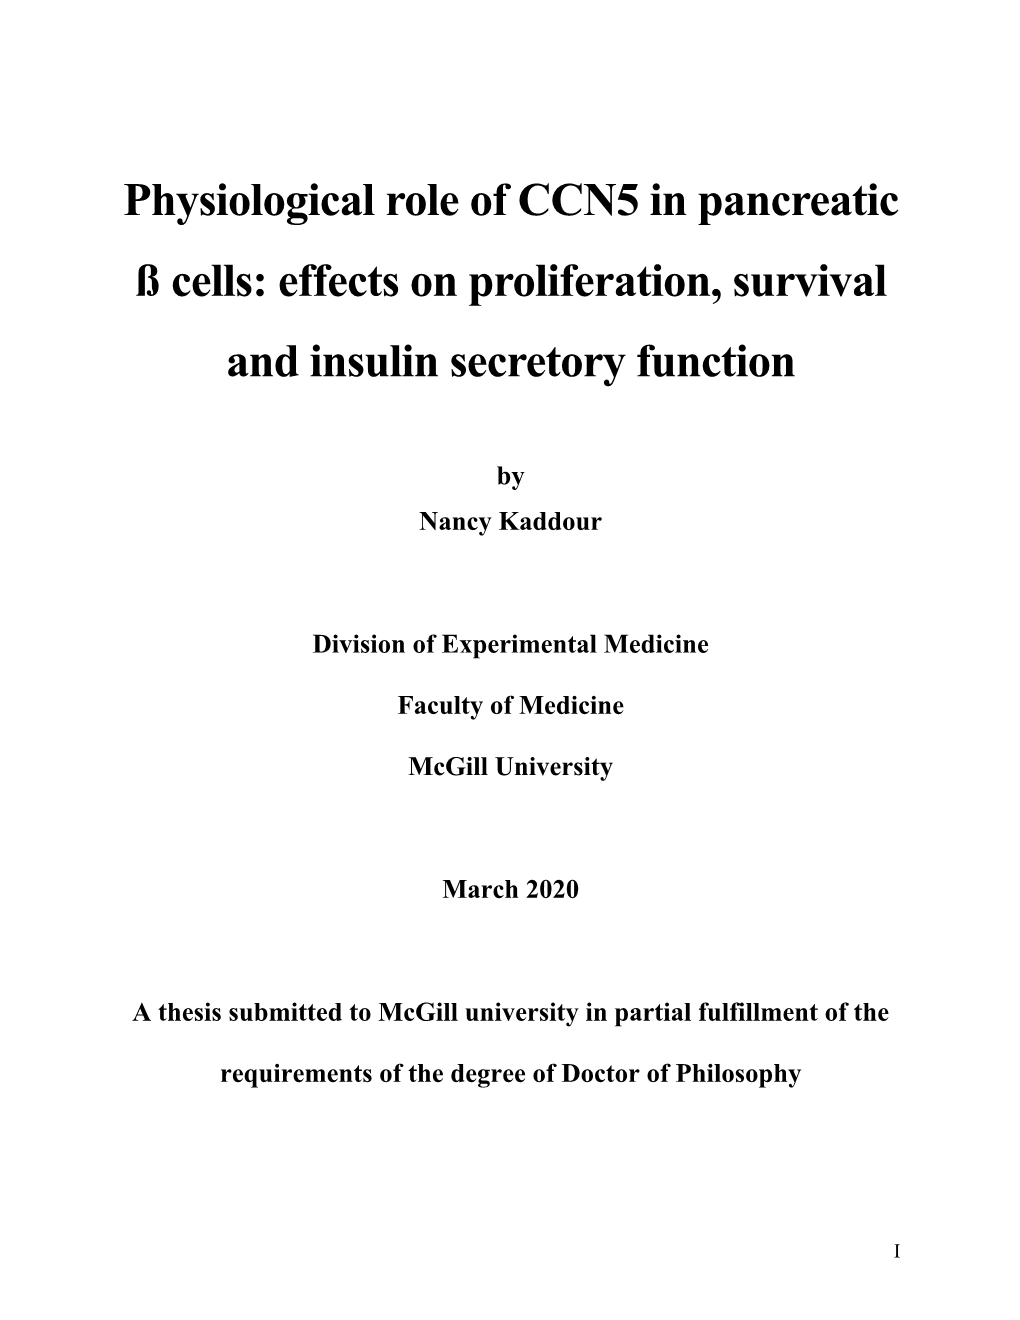 Physiological Role of CCN5 in Pancreatic ß Cells: Effects on Proliferation, Survival and Insulin Secretory Function